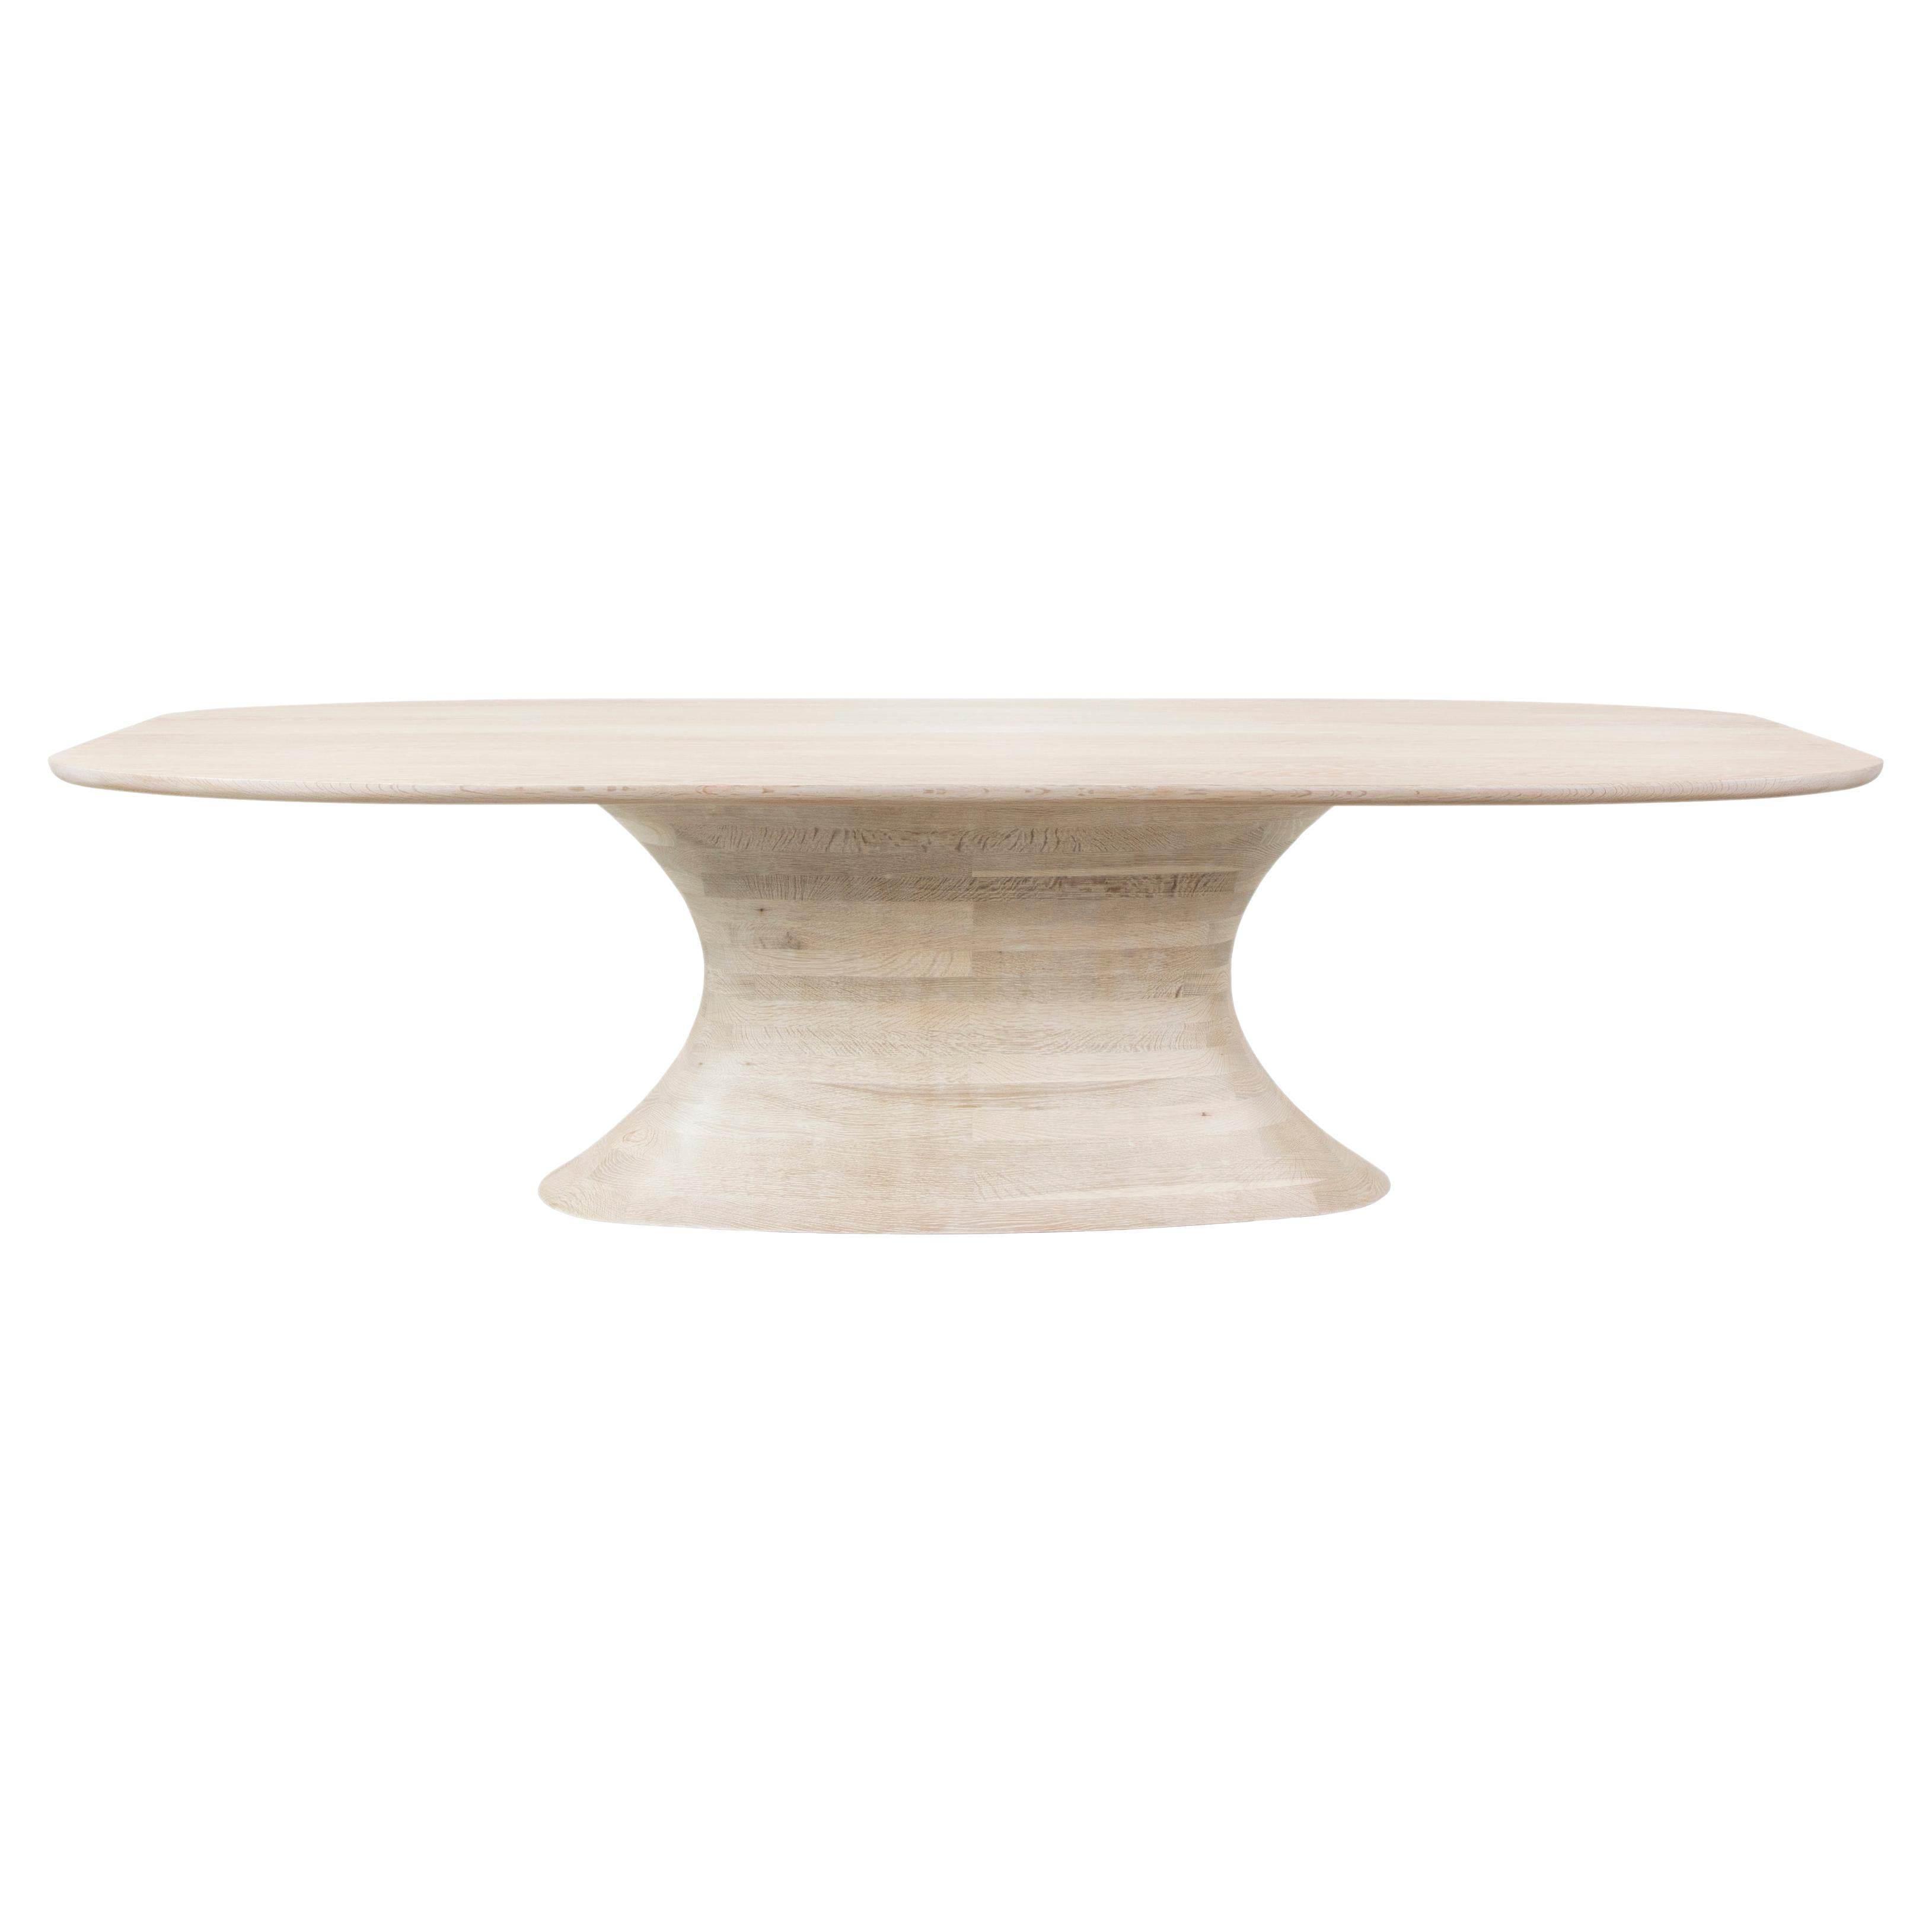 CONCAVE Statement Dining Table in White Oak